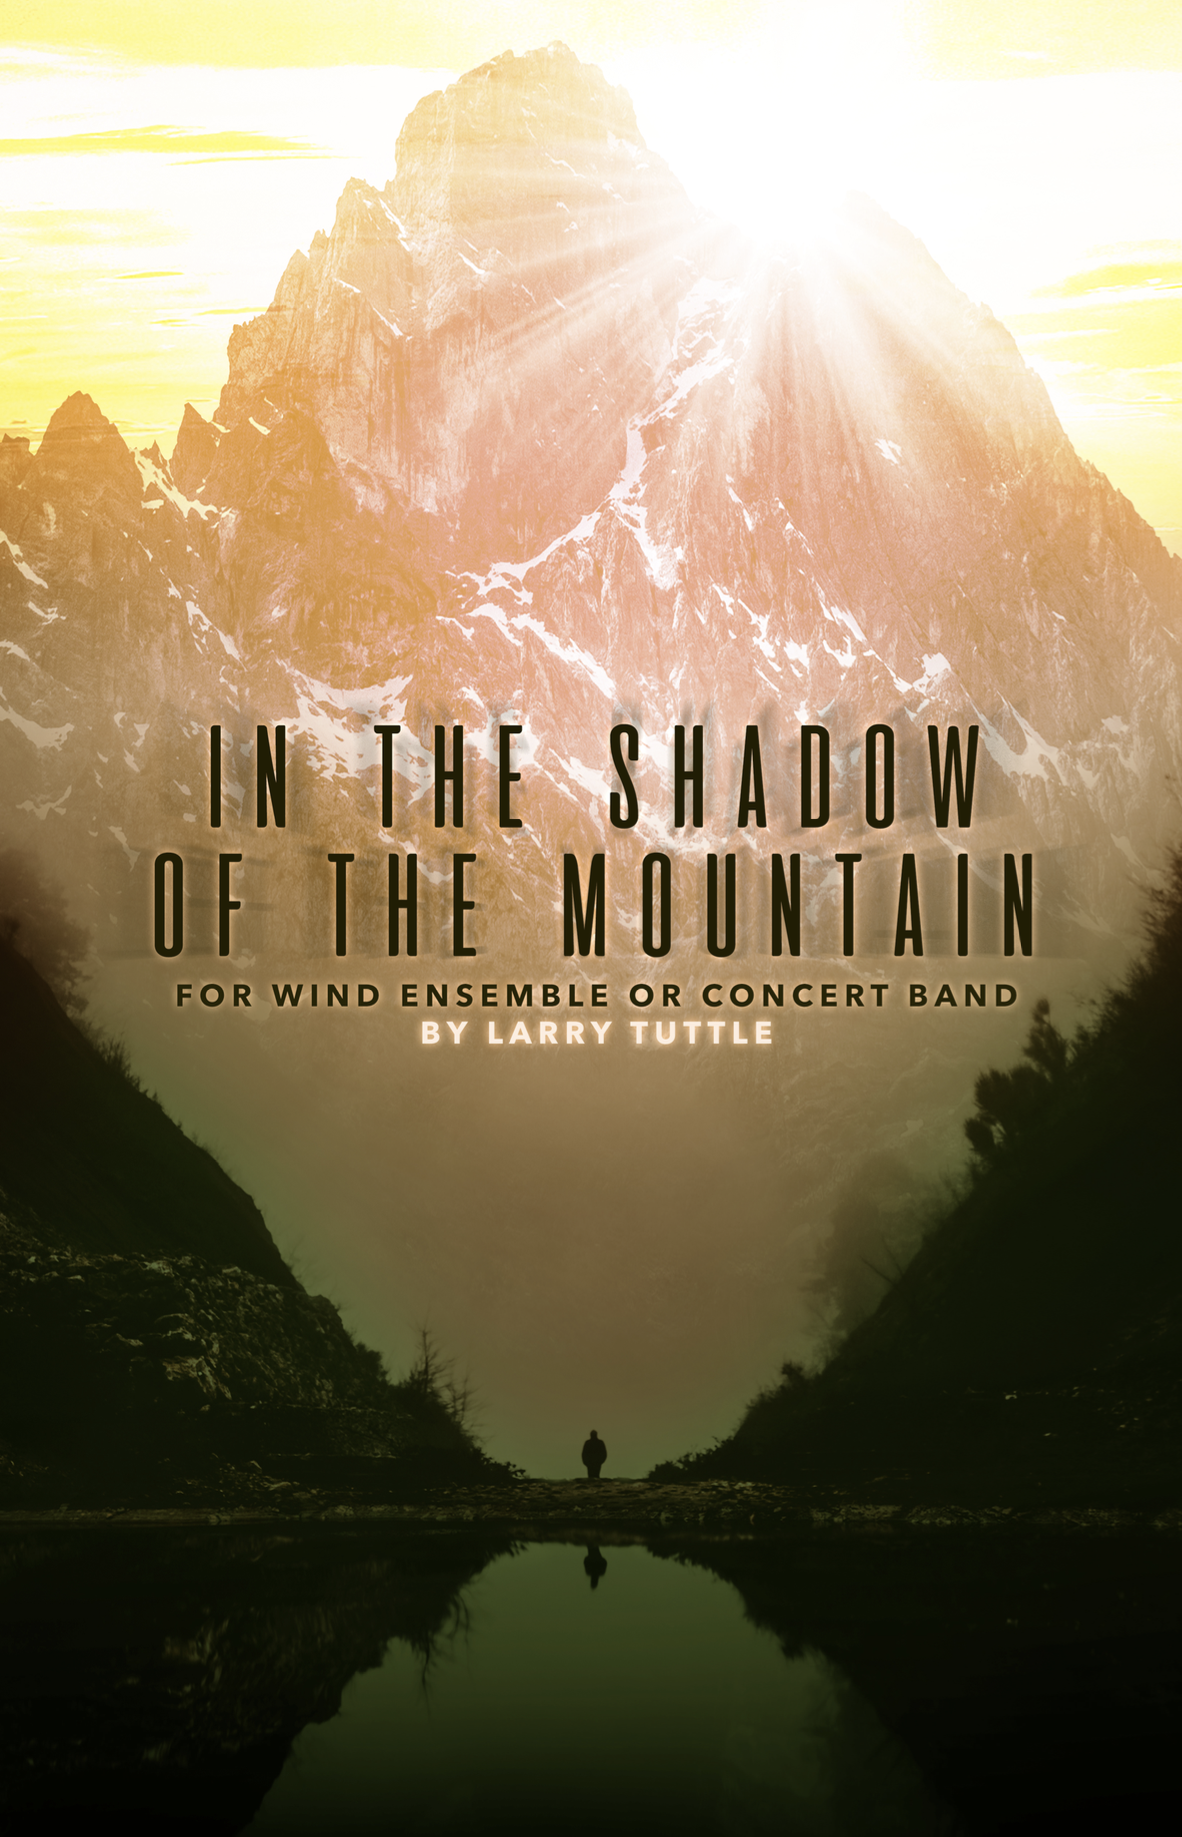 In The Shadow Of The Mountain by Larry Tuttle